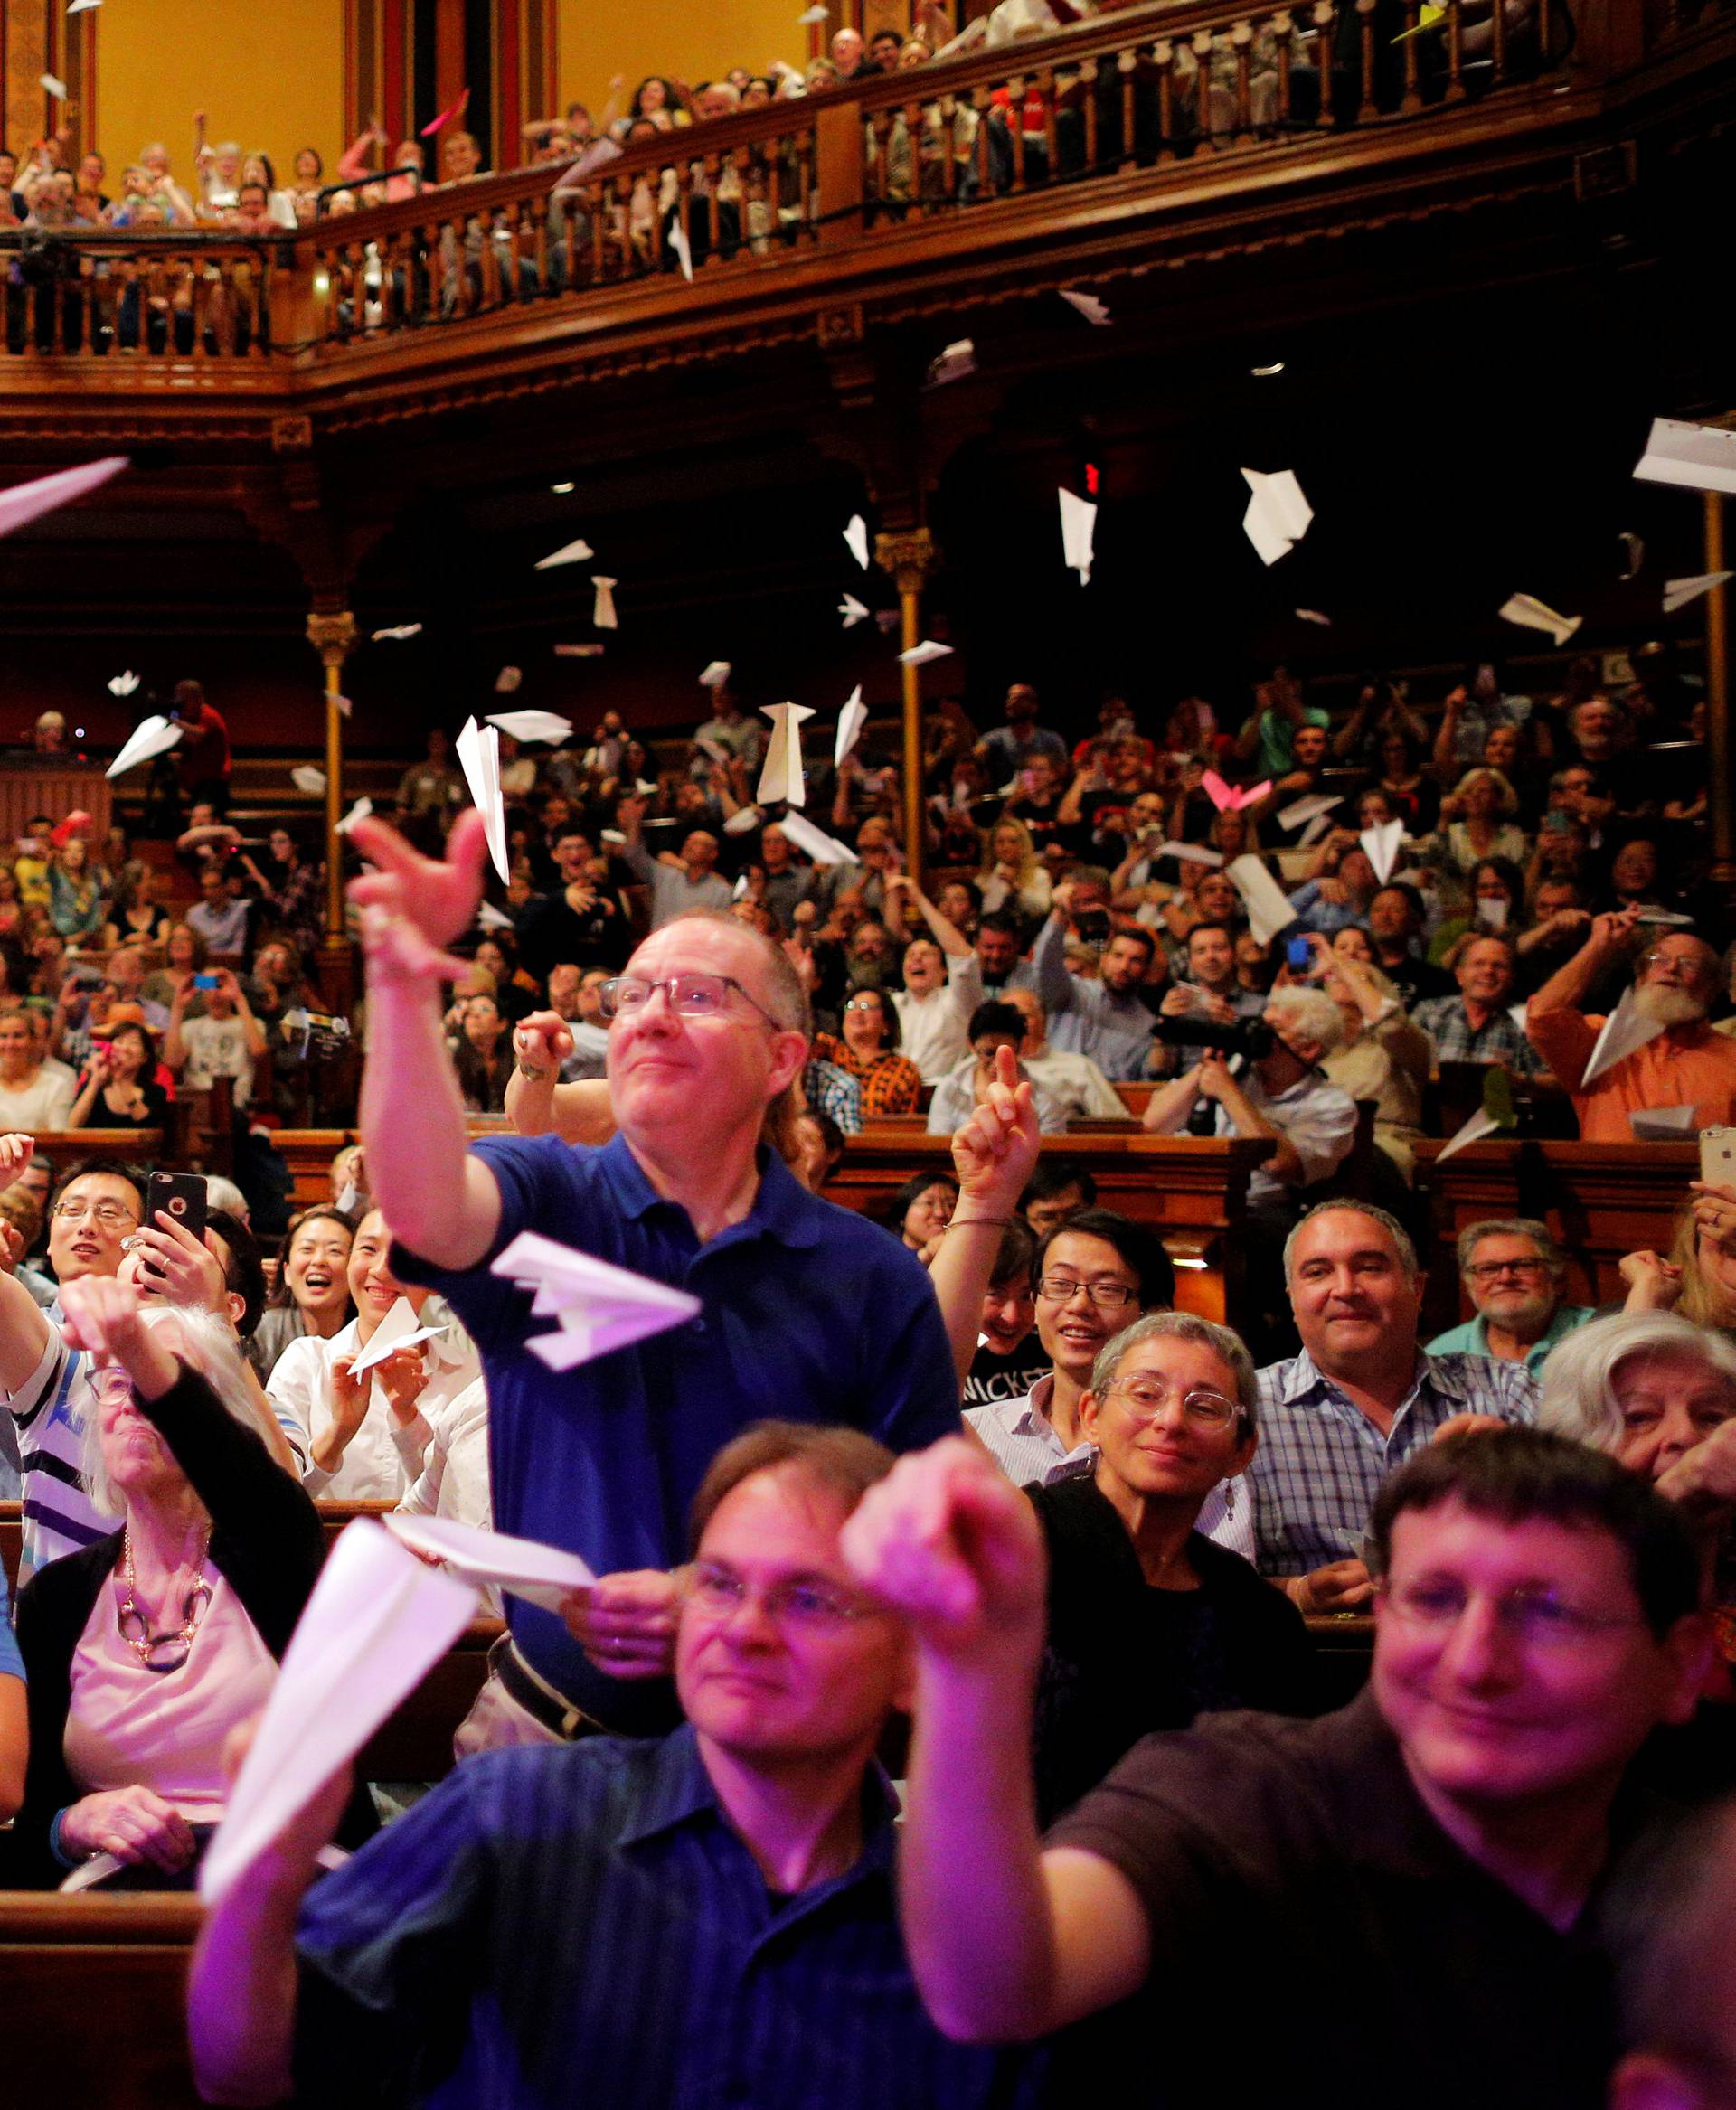 Audience members throw paper airplanes at the stage during the 26th First Annual Ig Nobel Prize ceremony at Harvard University in Cambridge